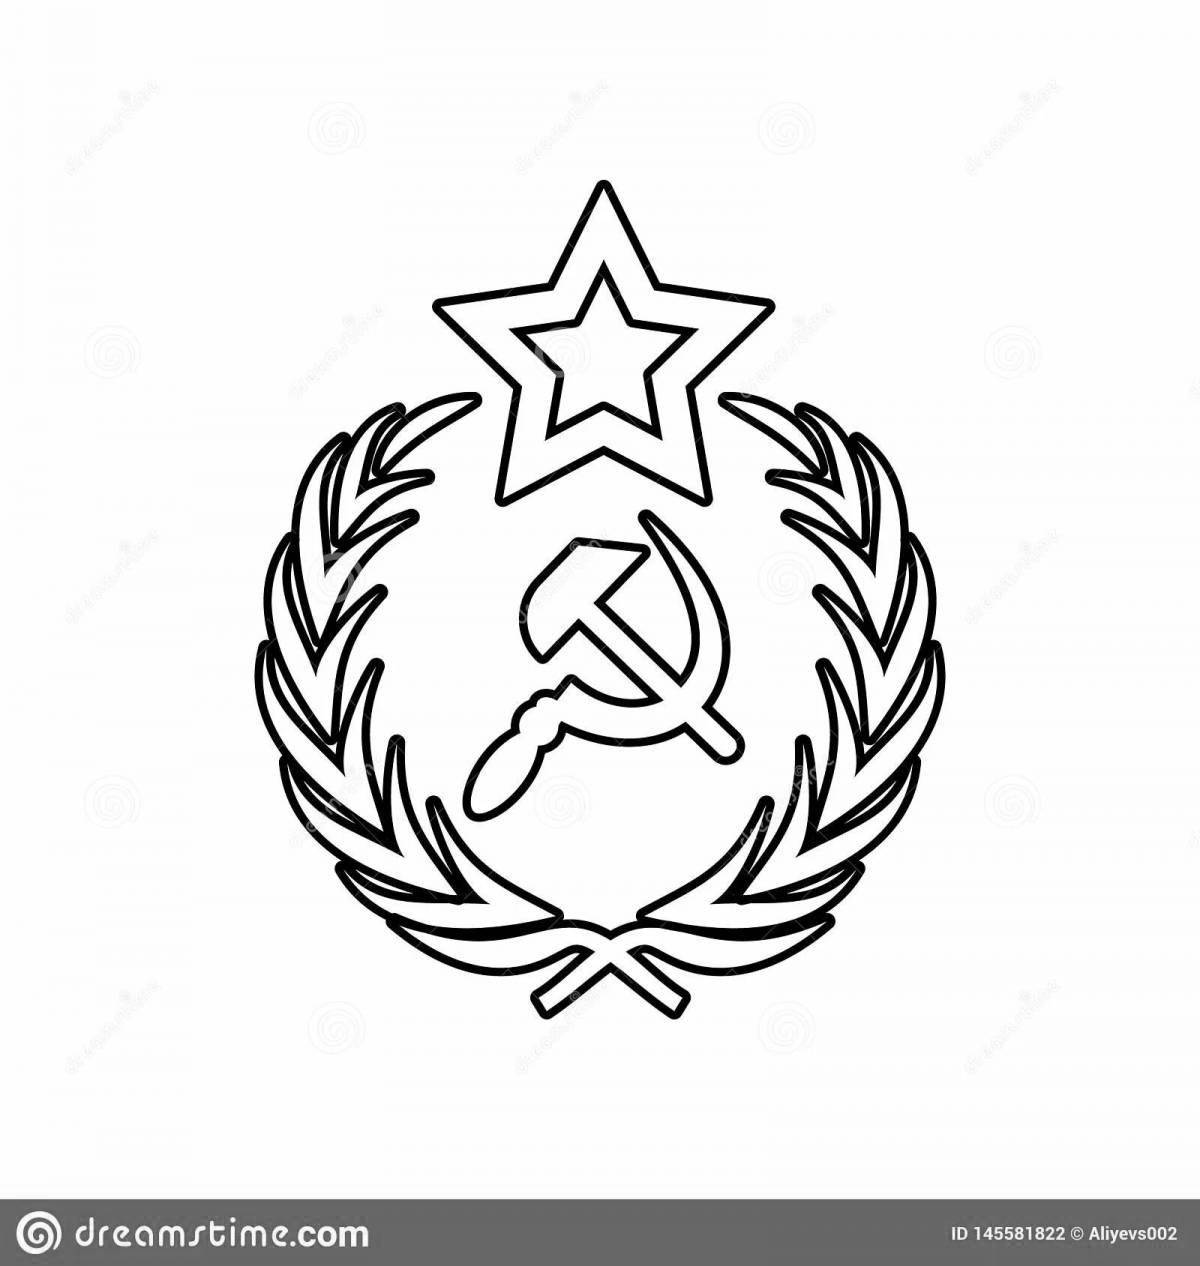 Coat of arms of the Soviet Union #9